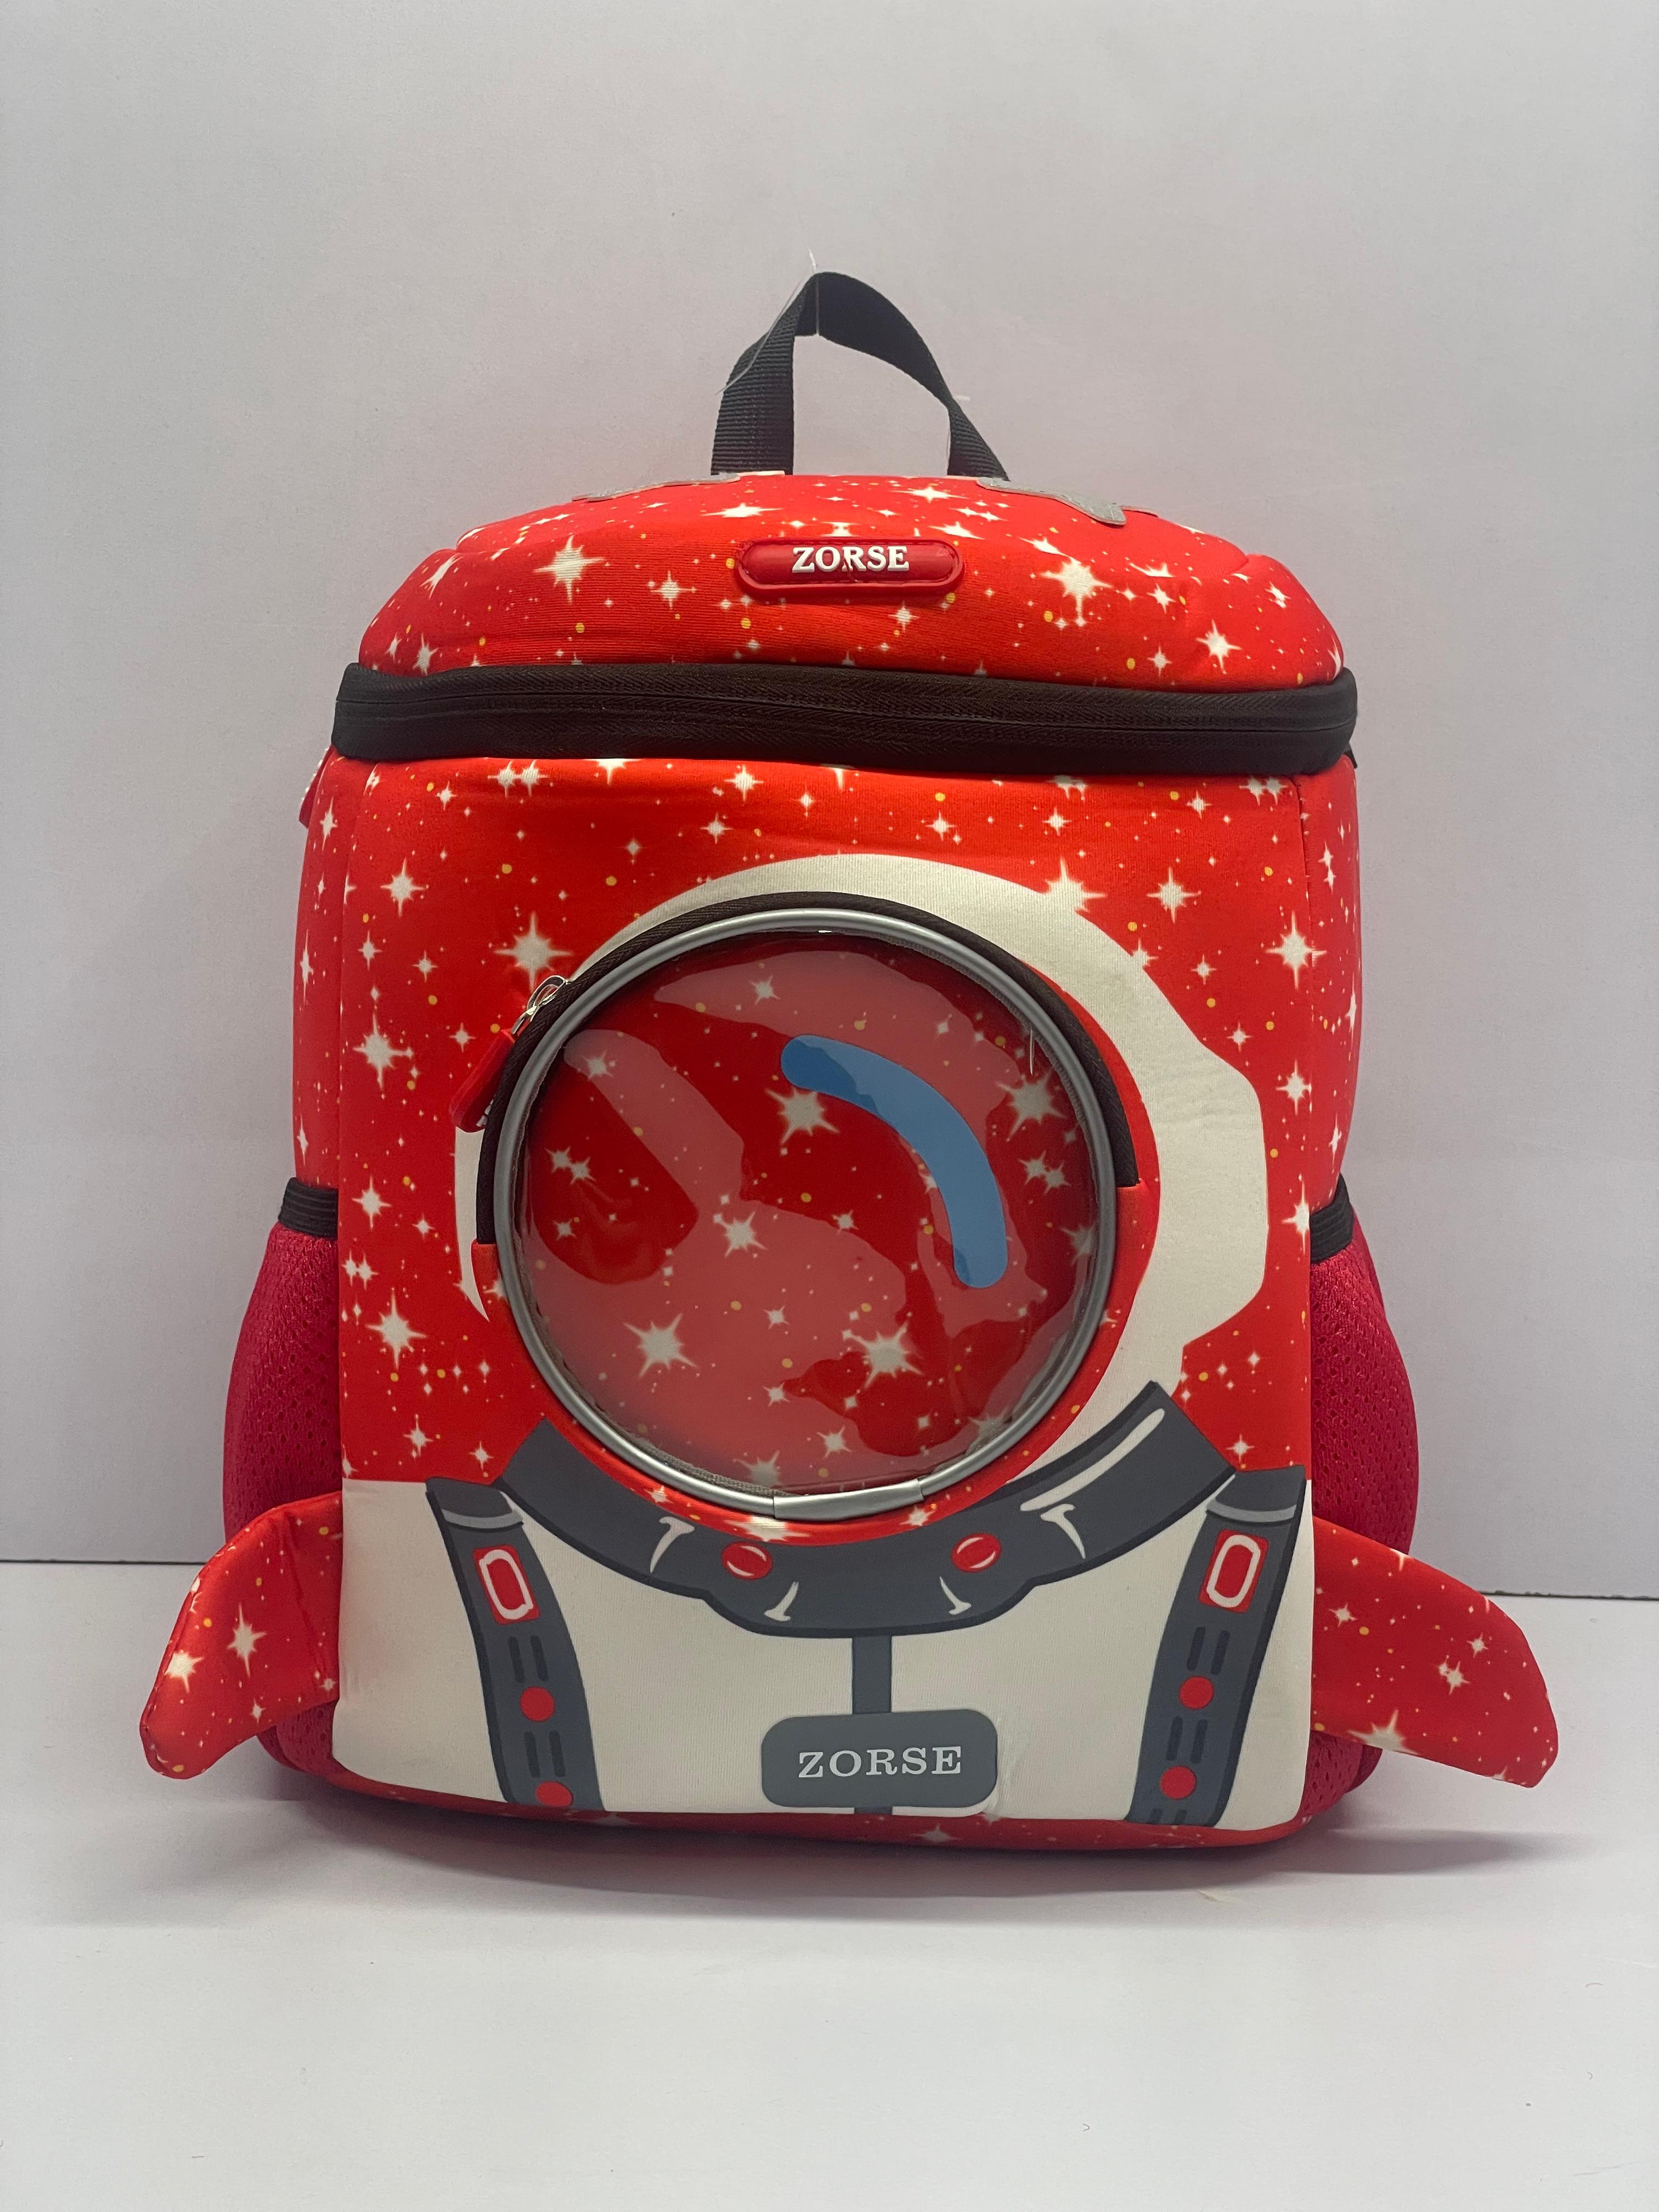 ZORSE space school backpacks for your kiddos!